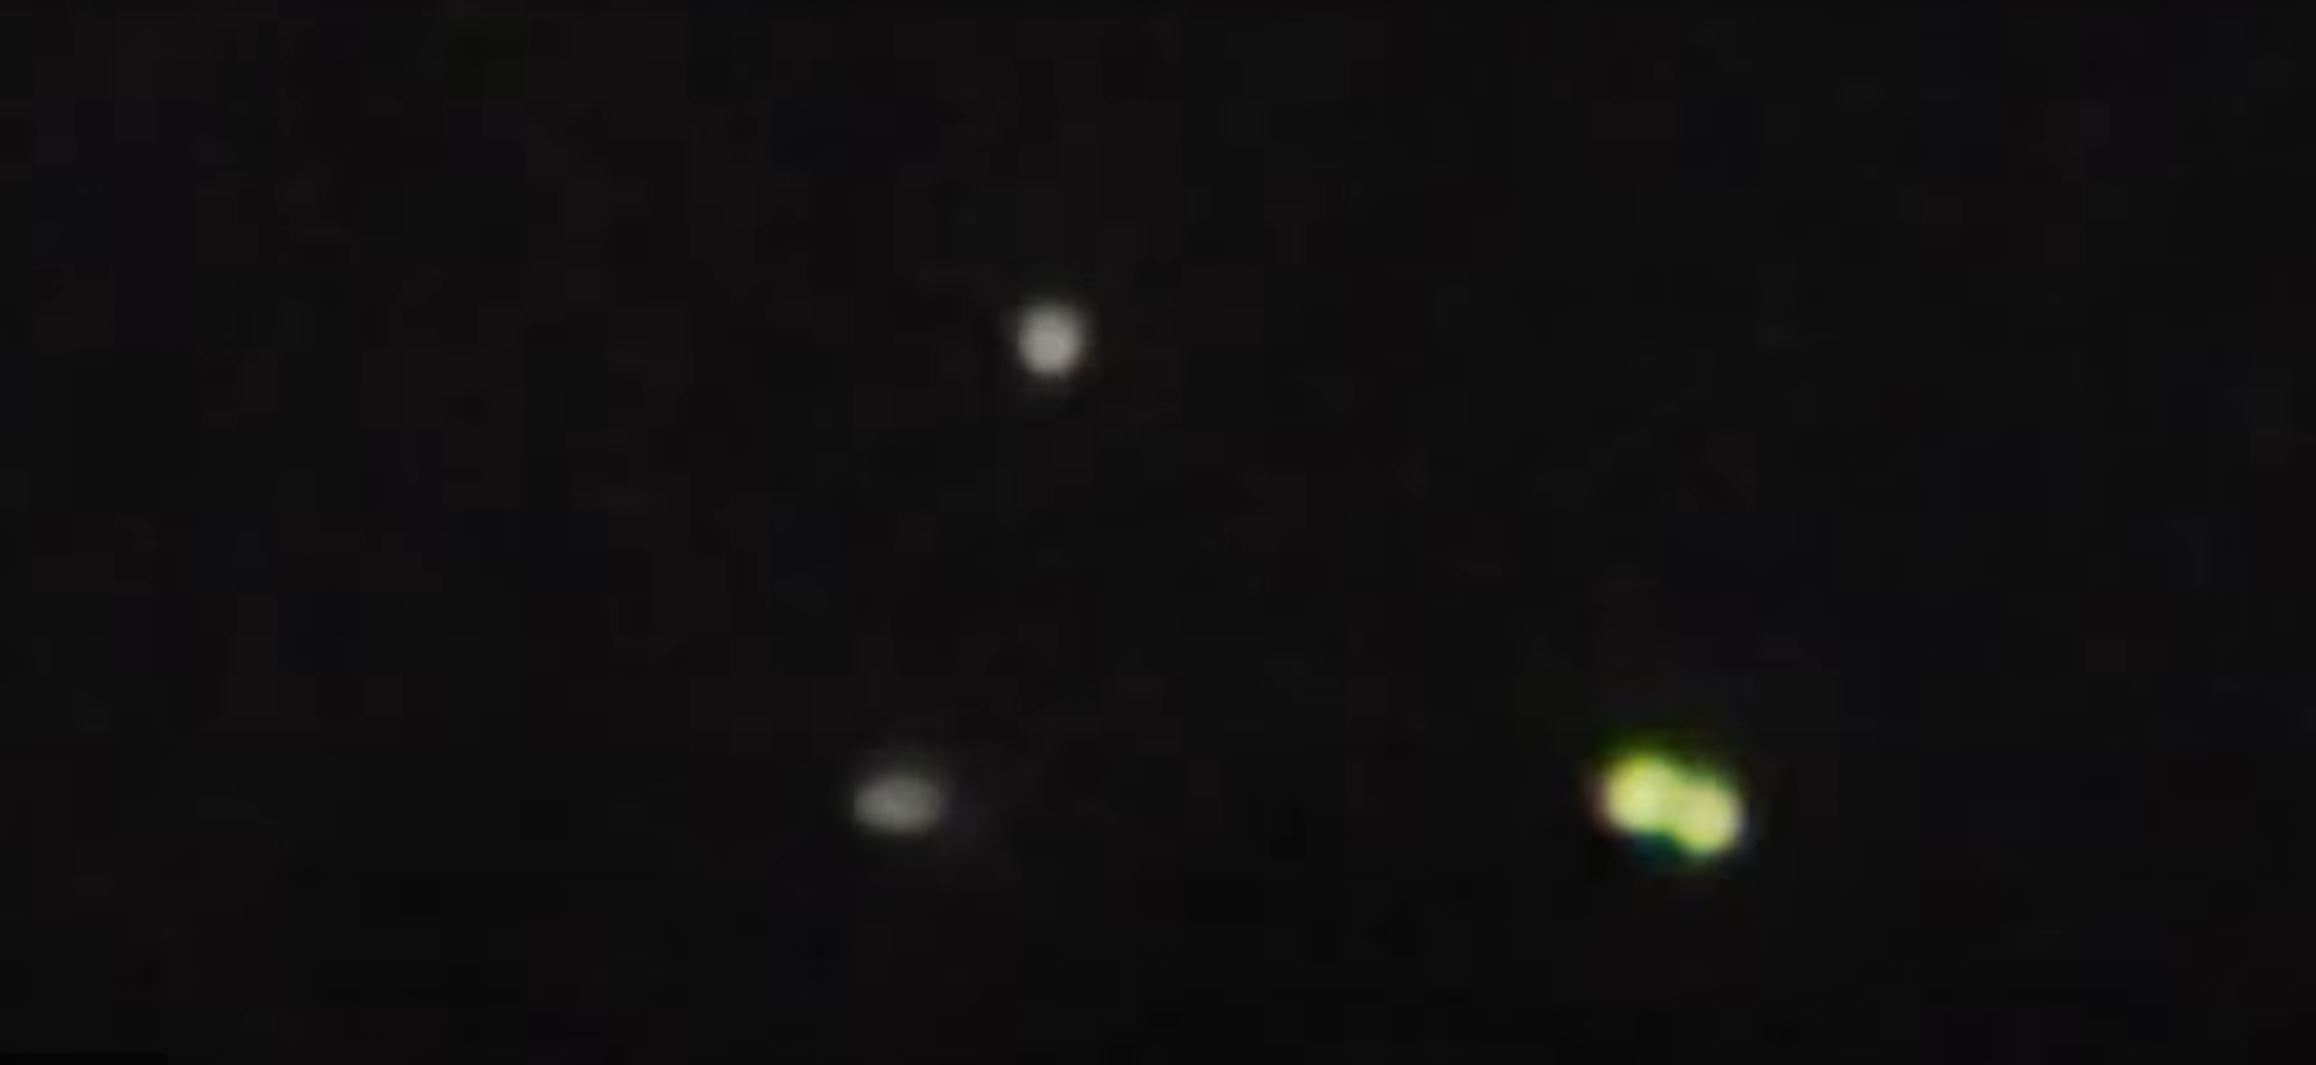 A screenshot of the UFOs. Image Credit: Jeremy Corbell.